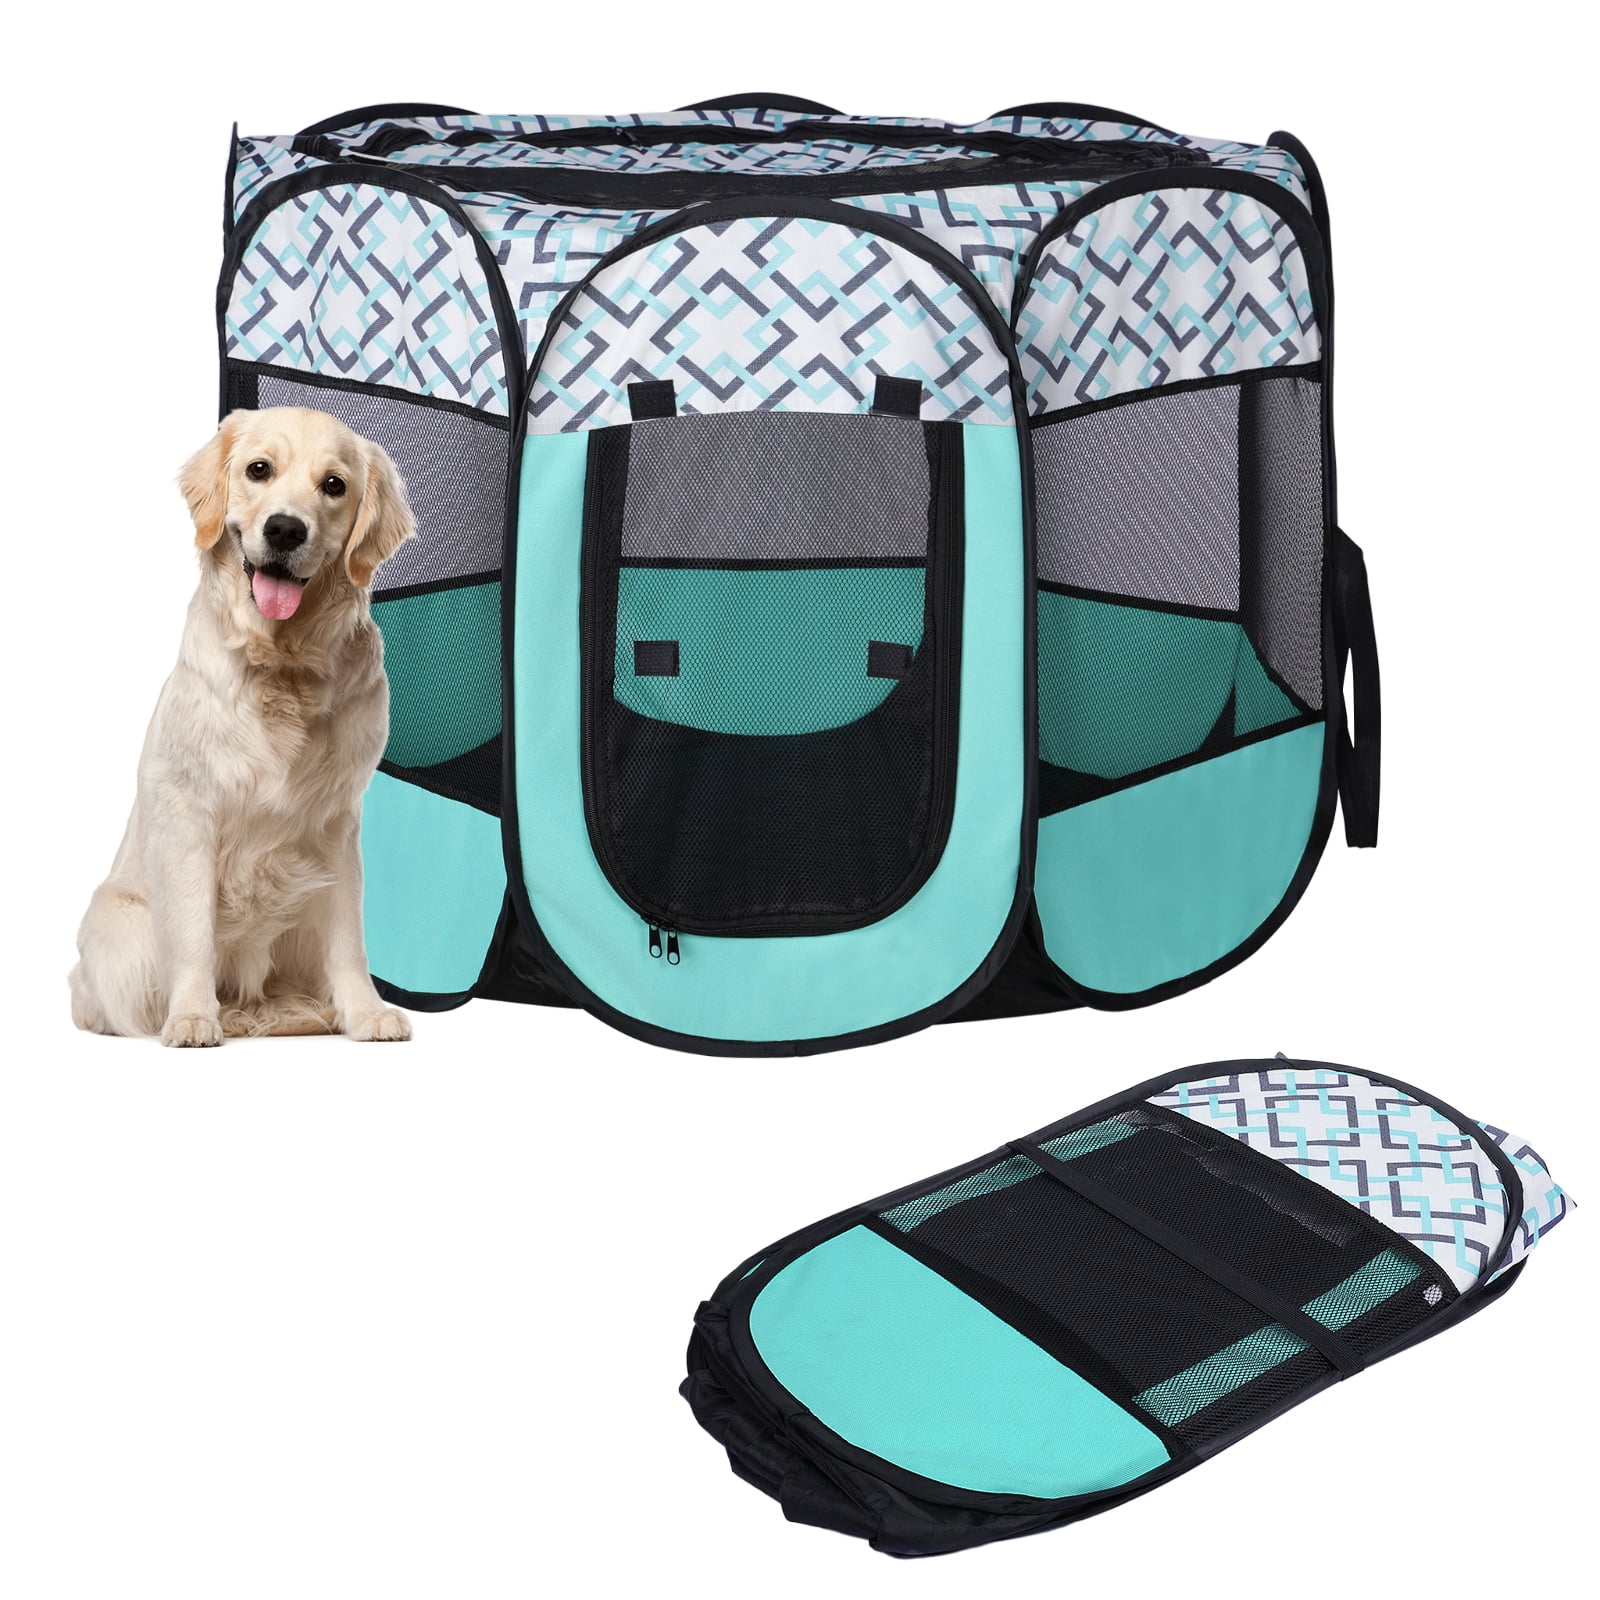 Portable Playpen Dog House Lightweight Playground Cat Tent Cage Breathable Puppy Kennel for Small Animals Dogs Rabbits Car Travel - Walmart.com